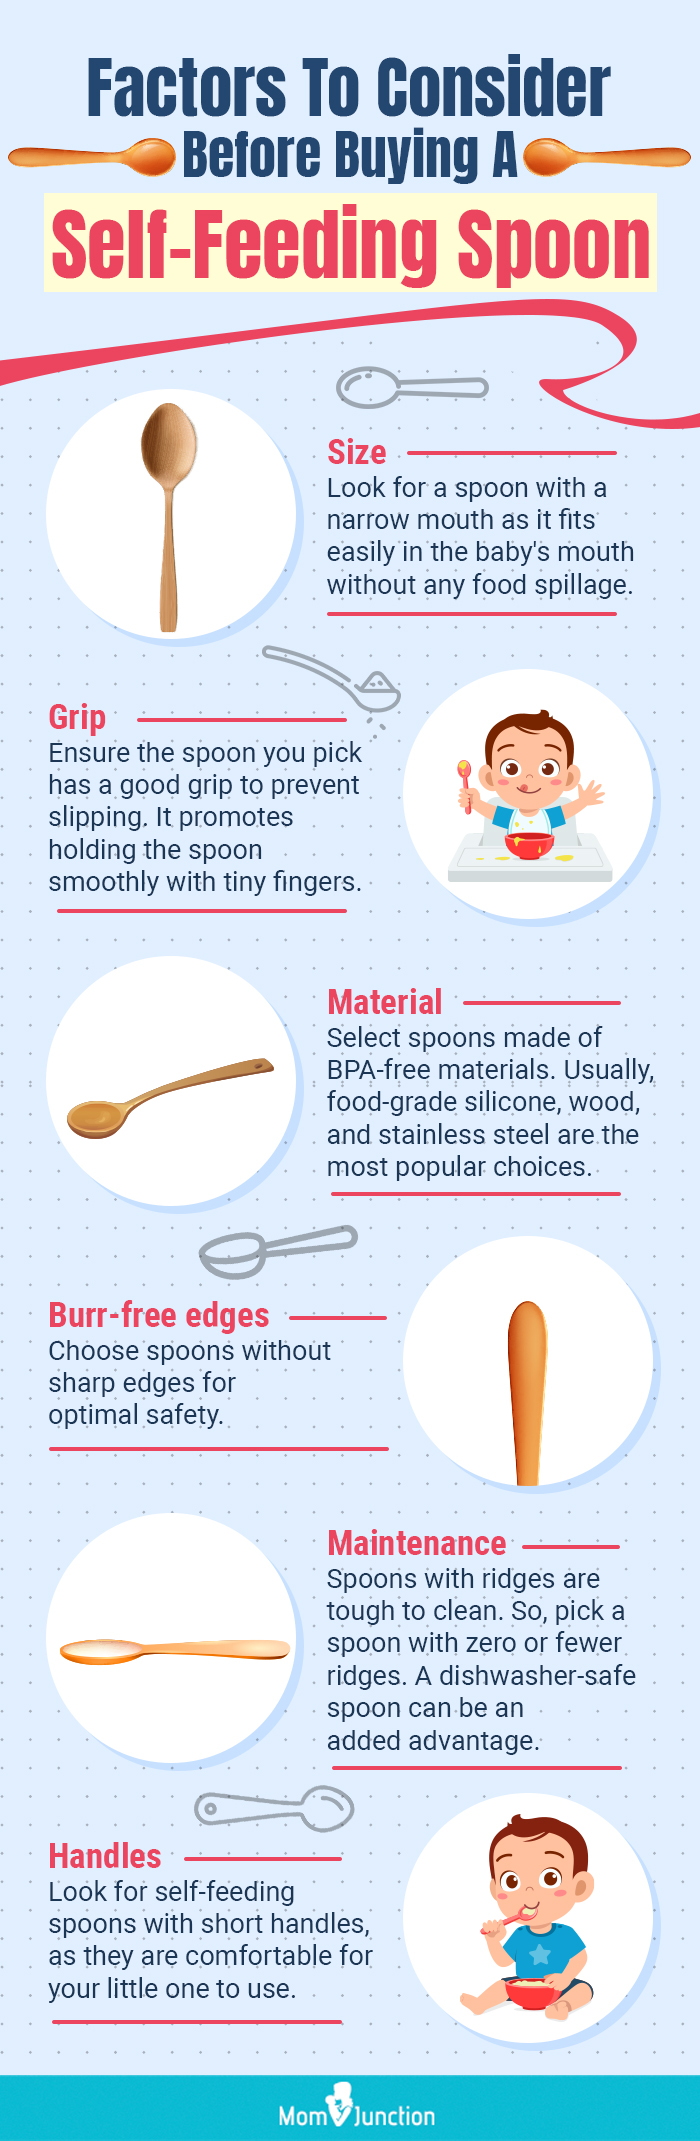 https://www.momjunction.com/wp-content/uploads/2023/01/Factors-To-Consider-Before-Buying-A-Self-Feeding-Spoon.jpg